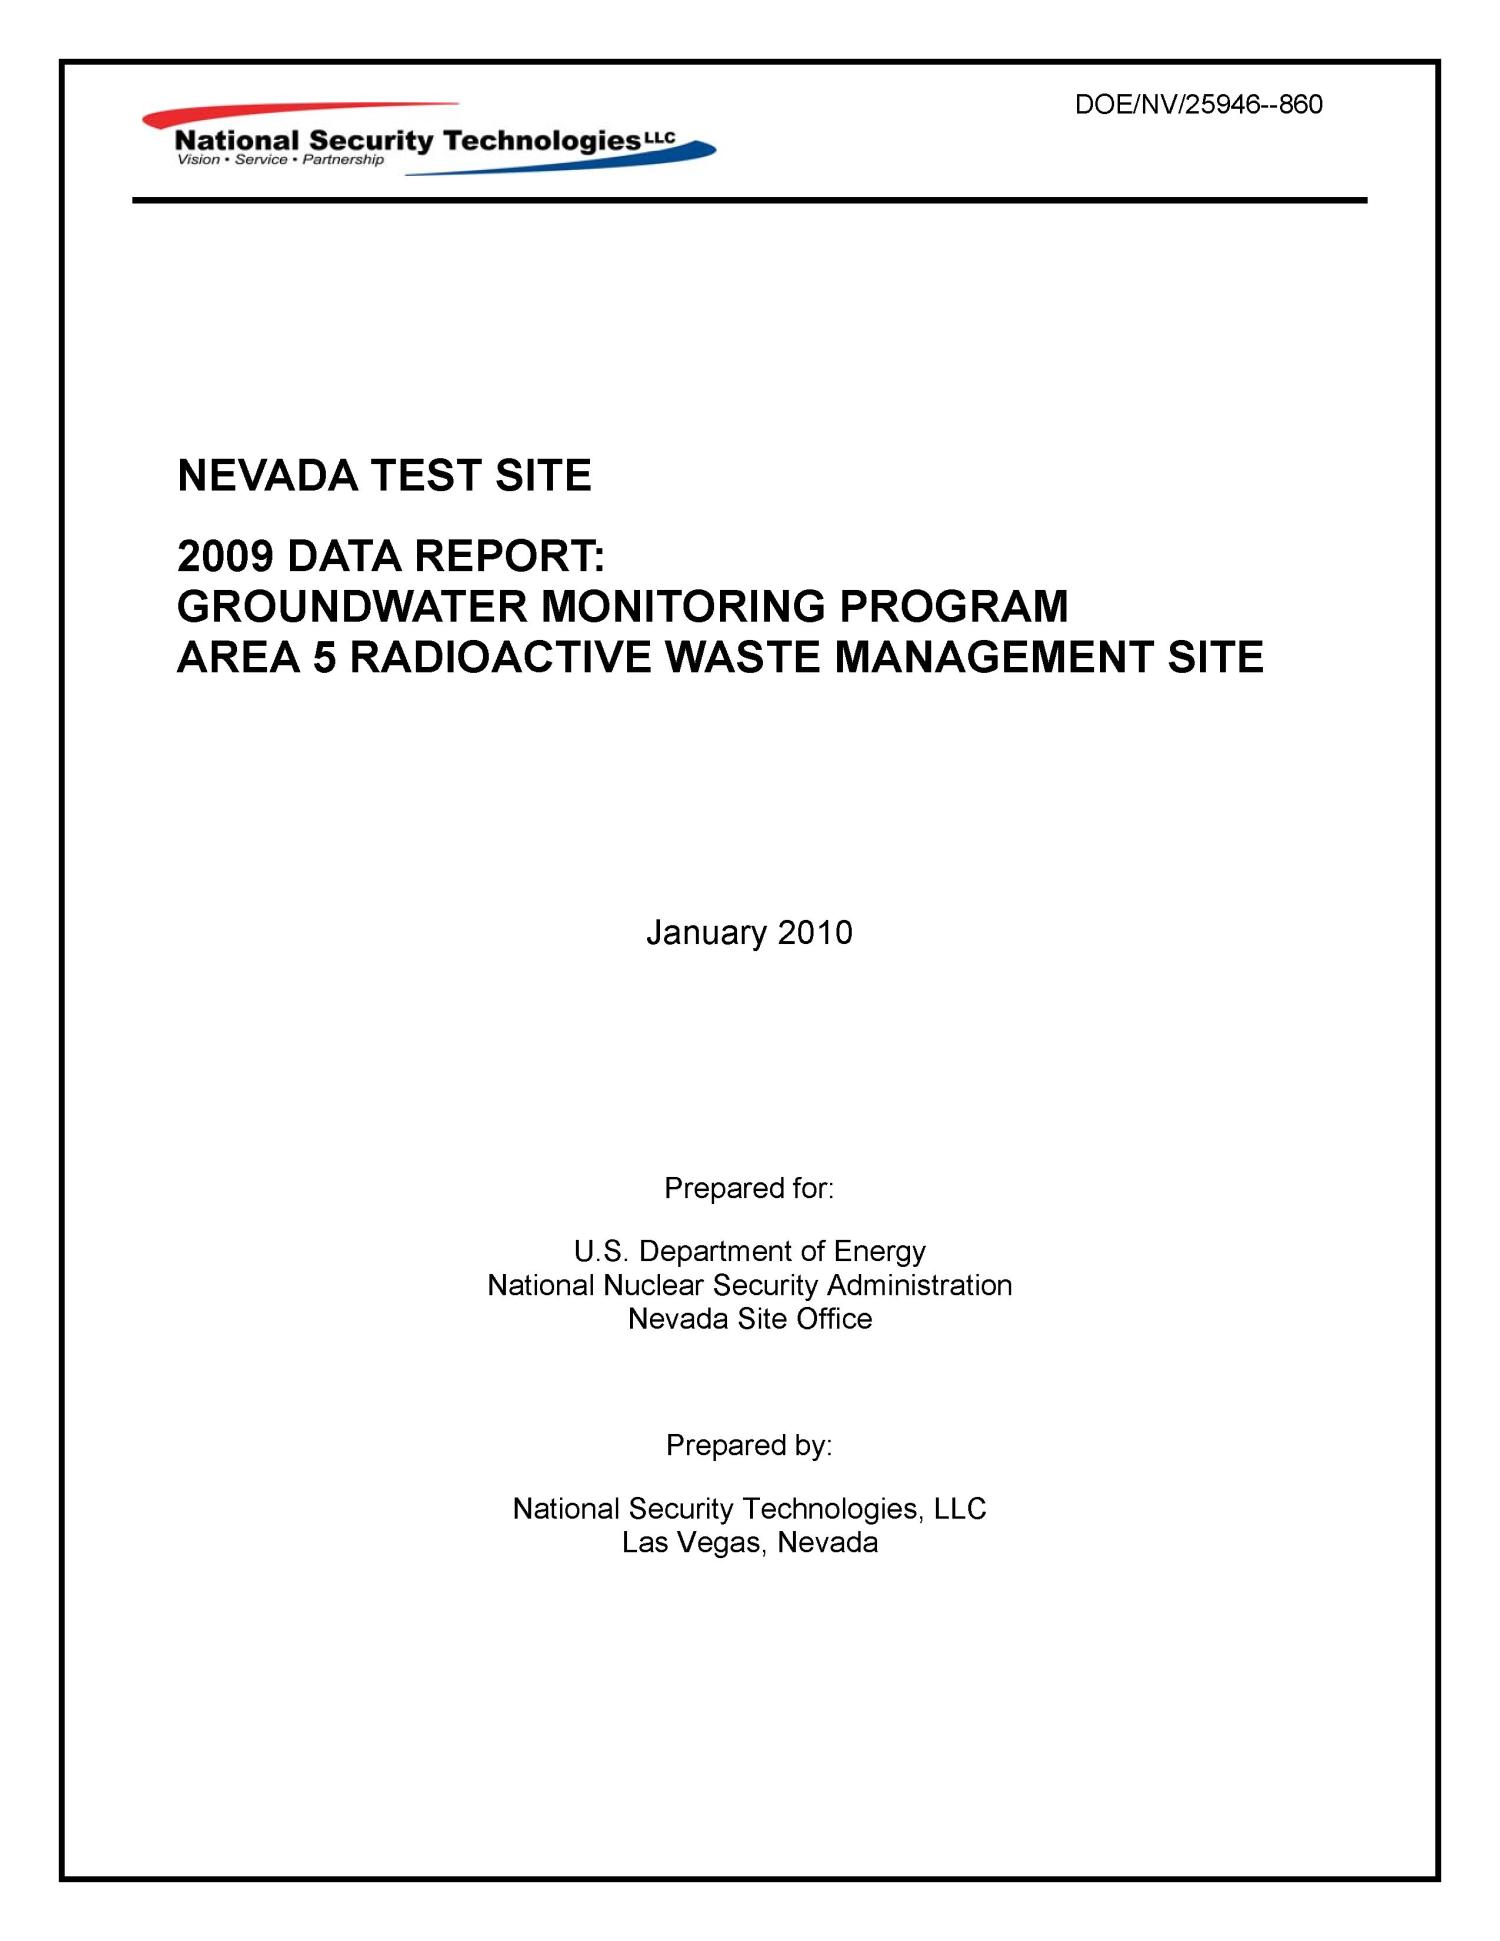 Nevada Test Site 2009 Data Report: Groundwater Monitoring Program, Area 5 Radioactive Waste Management Site
                                                
                                                    [Sequence #]: 1 of 54
                                                